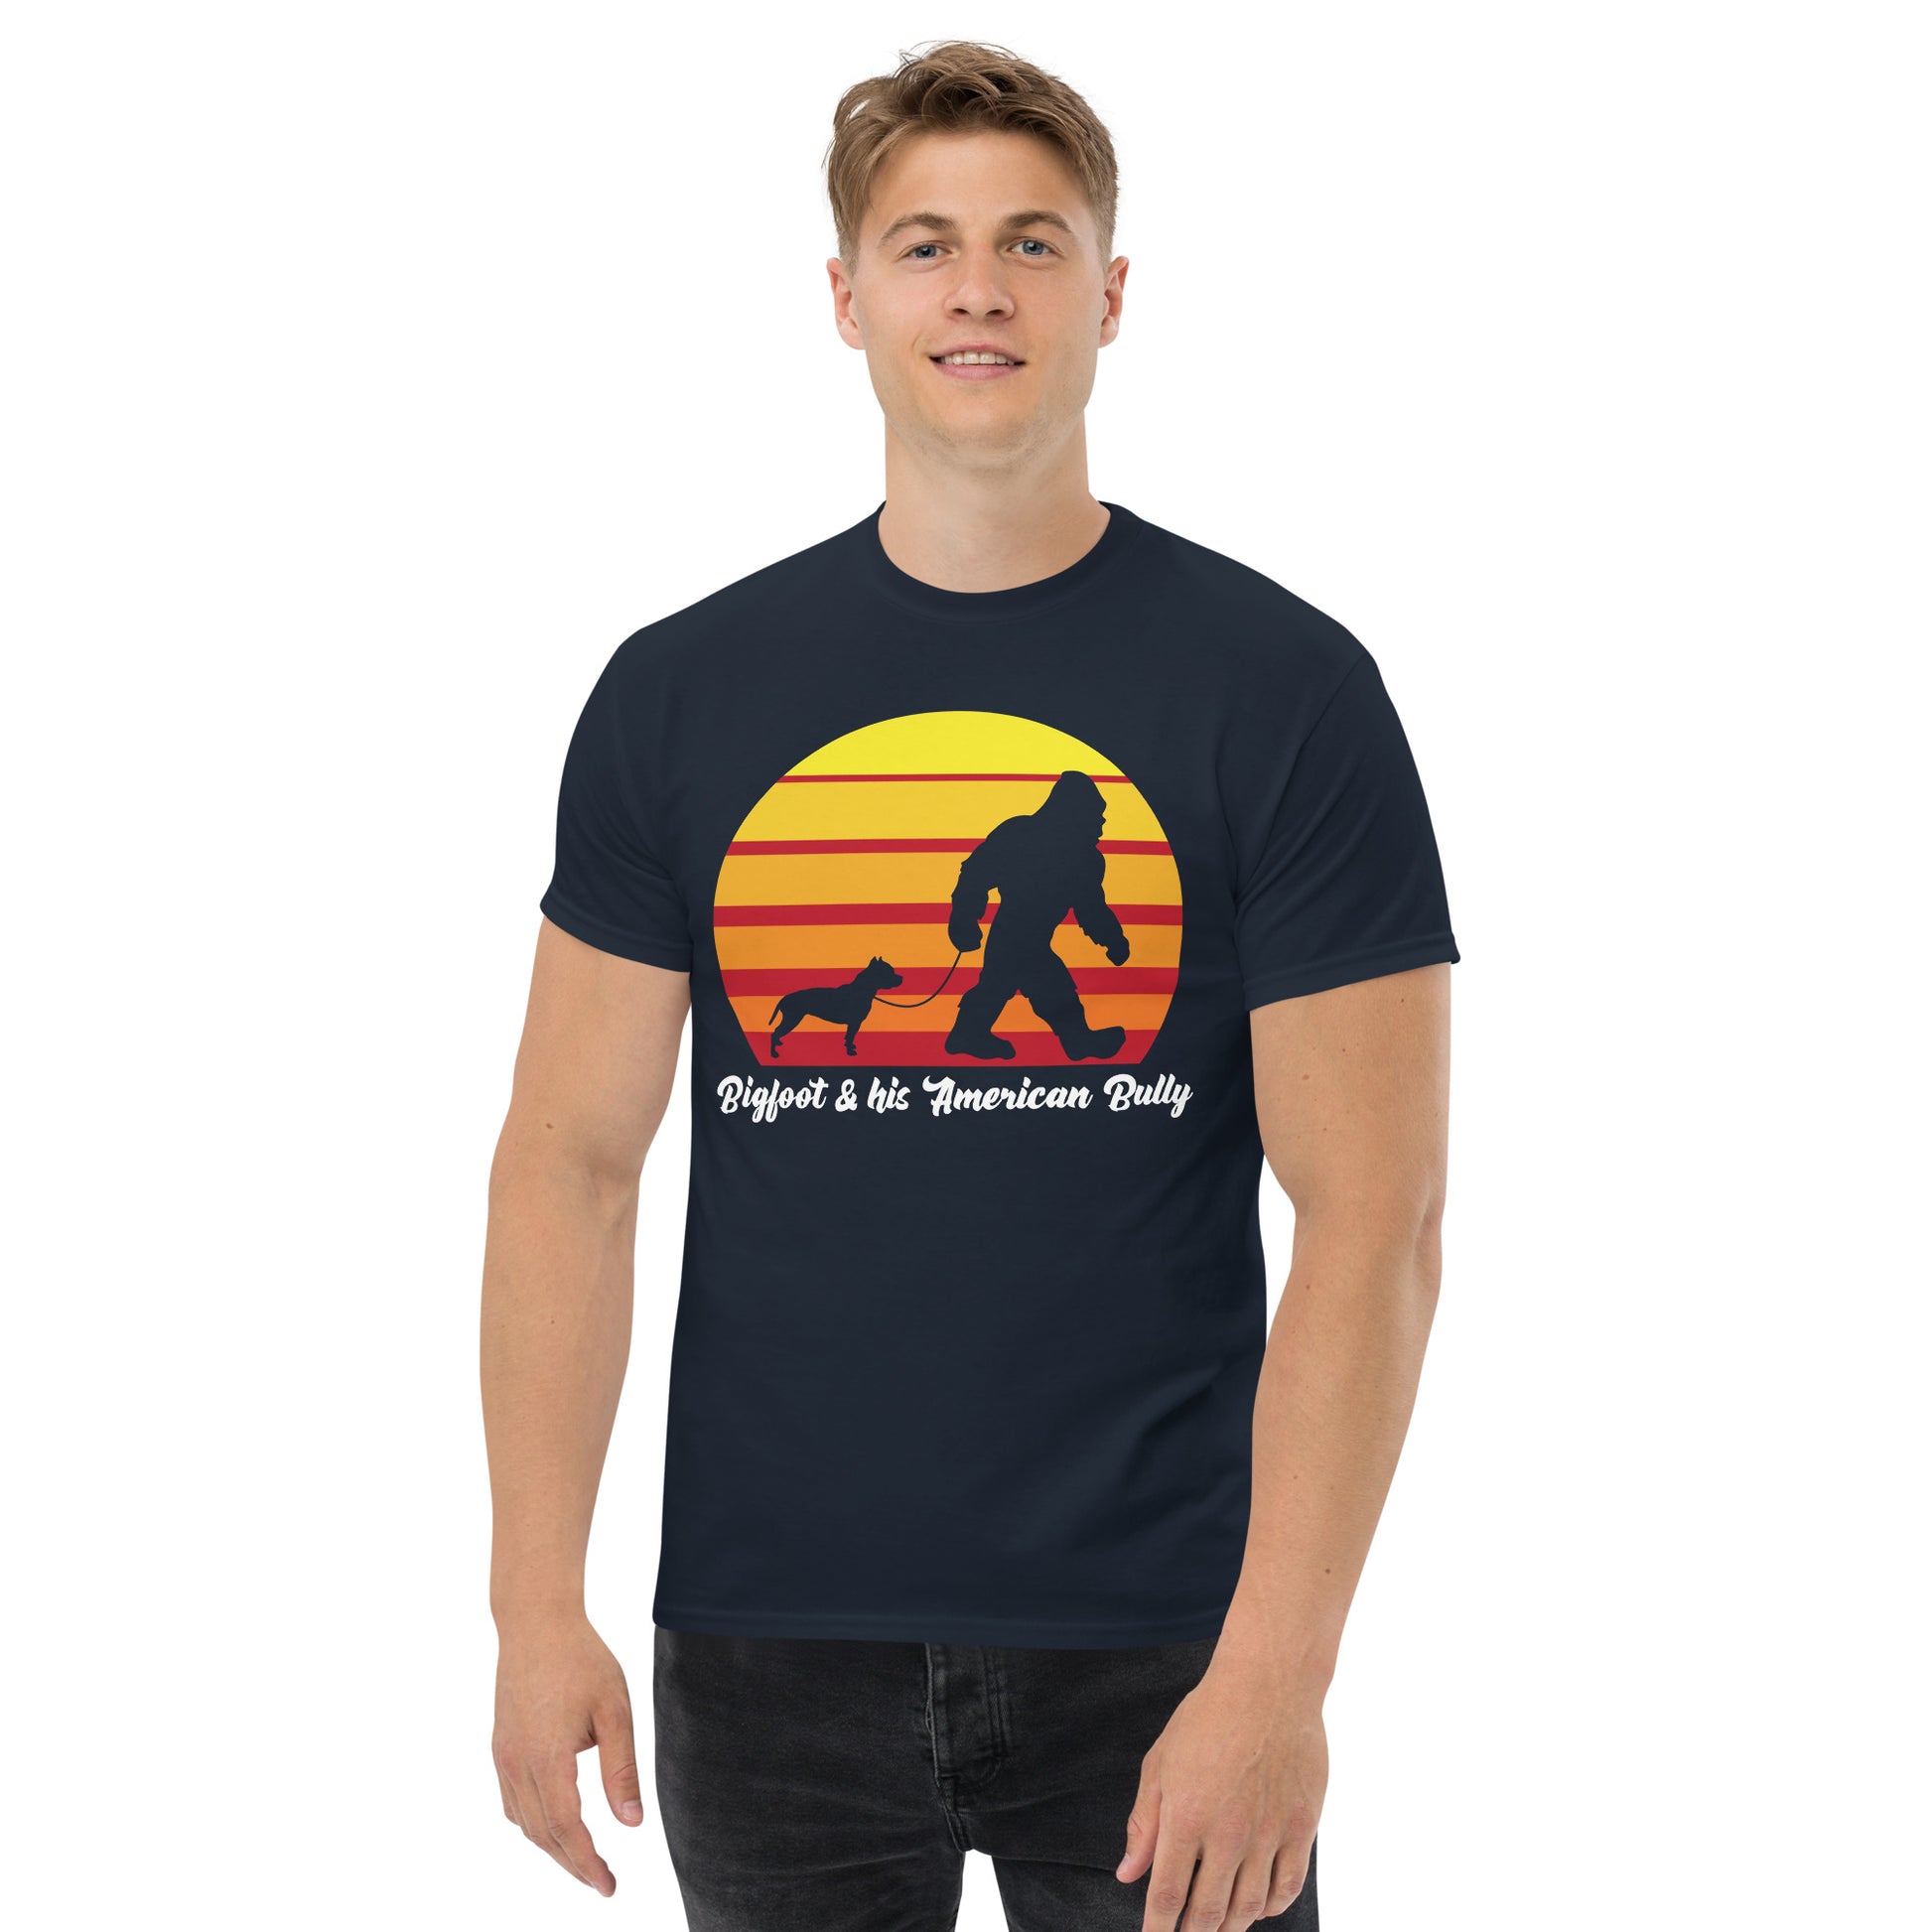 Big foot and his American Bully men’s navy t-shirt by Dog Artistry.